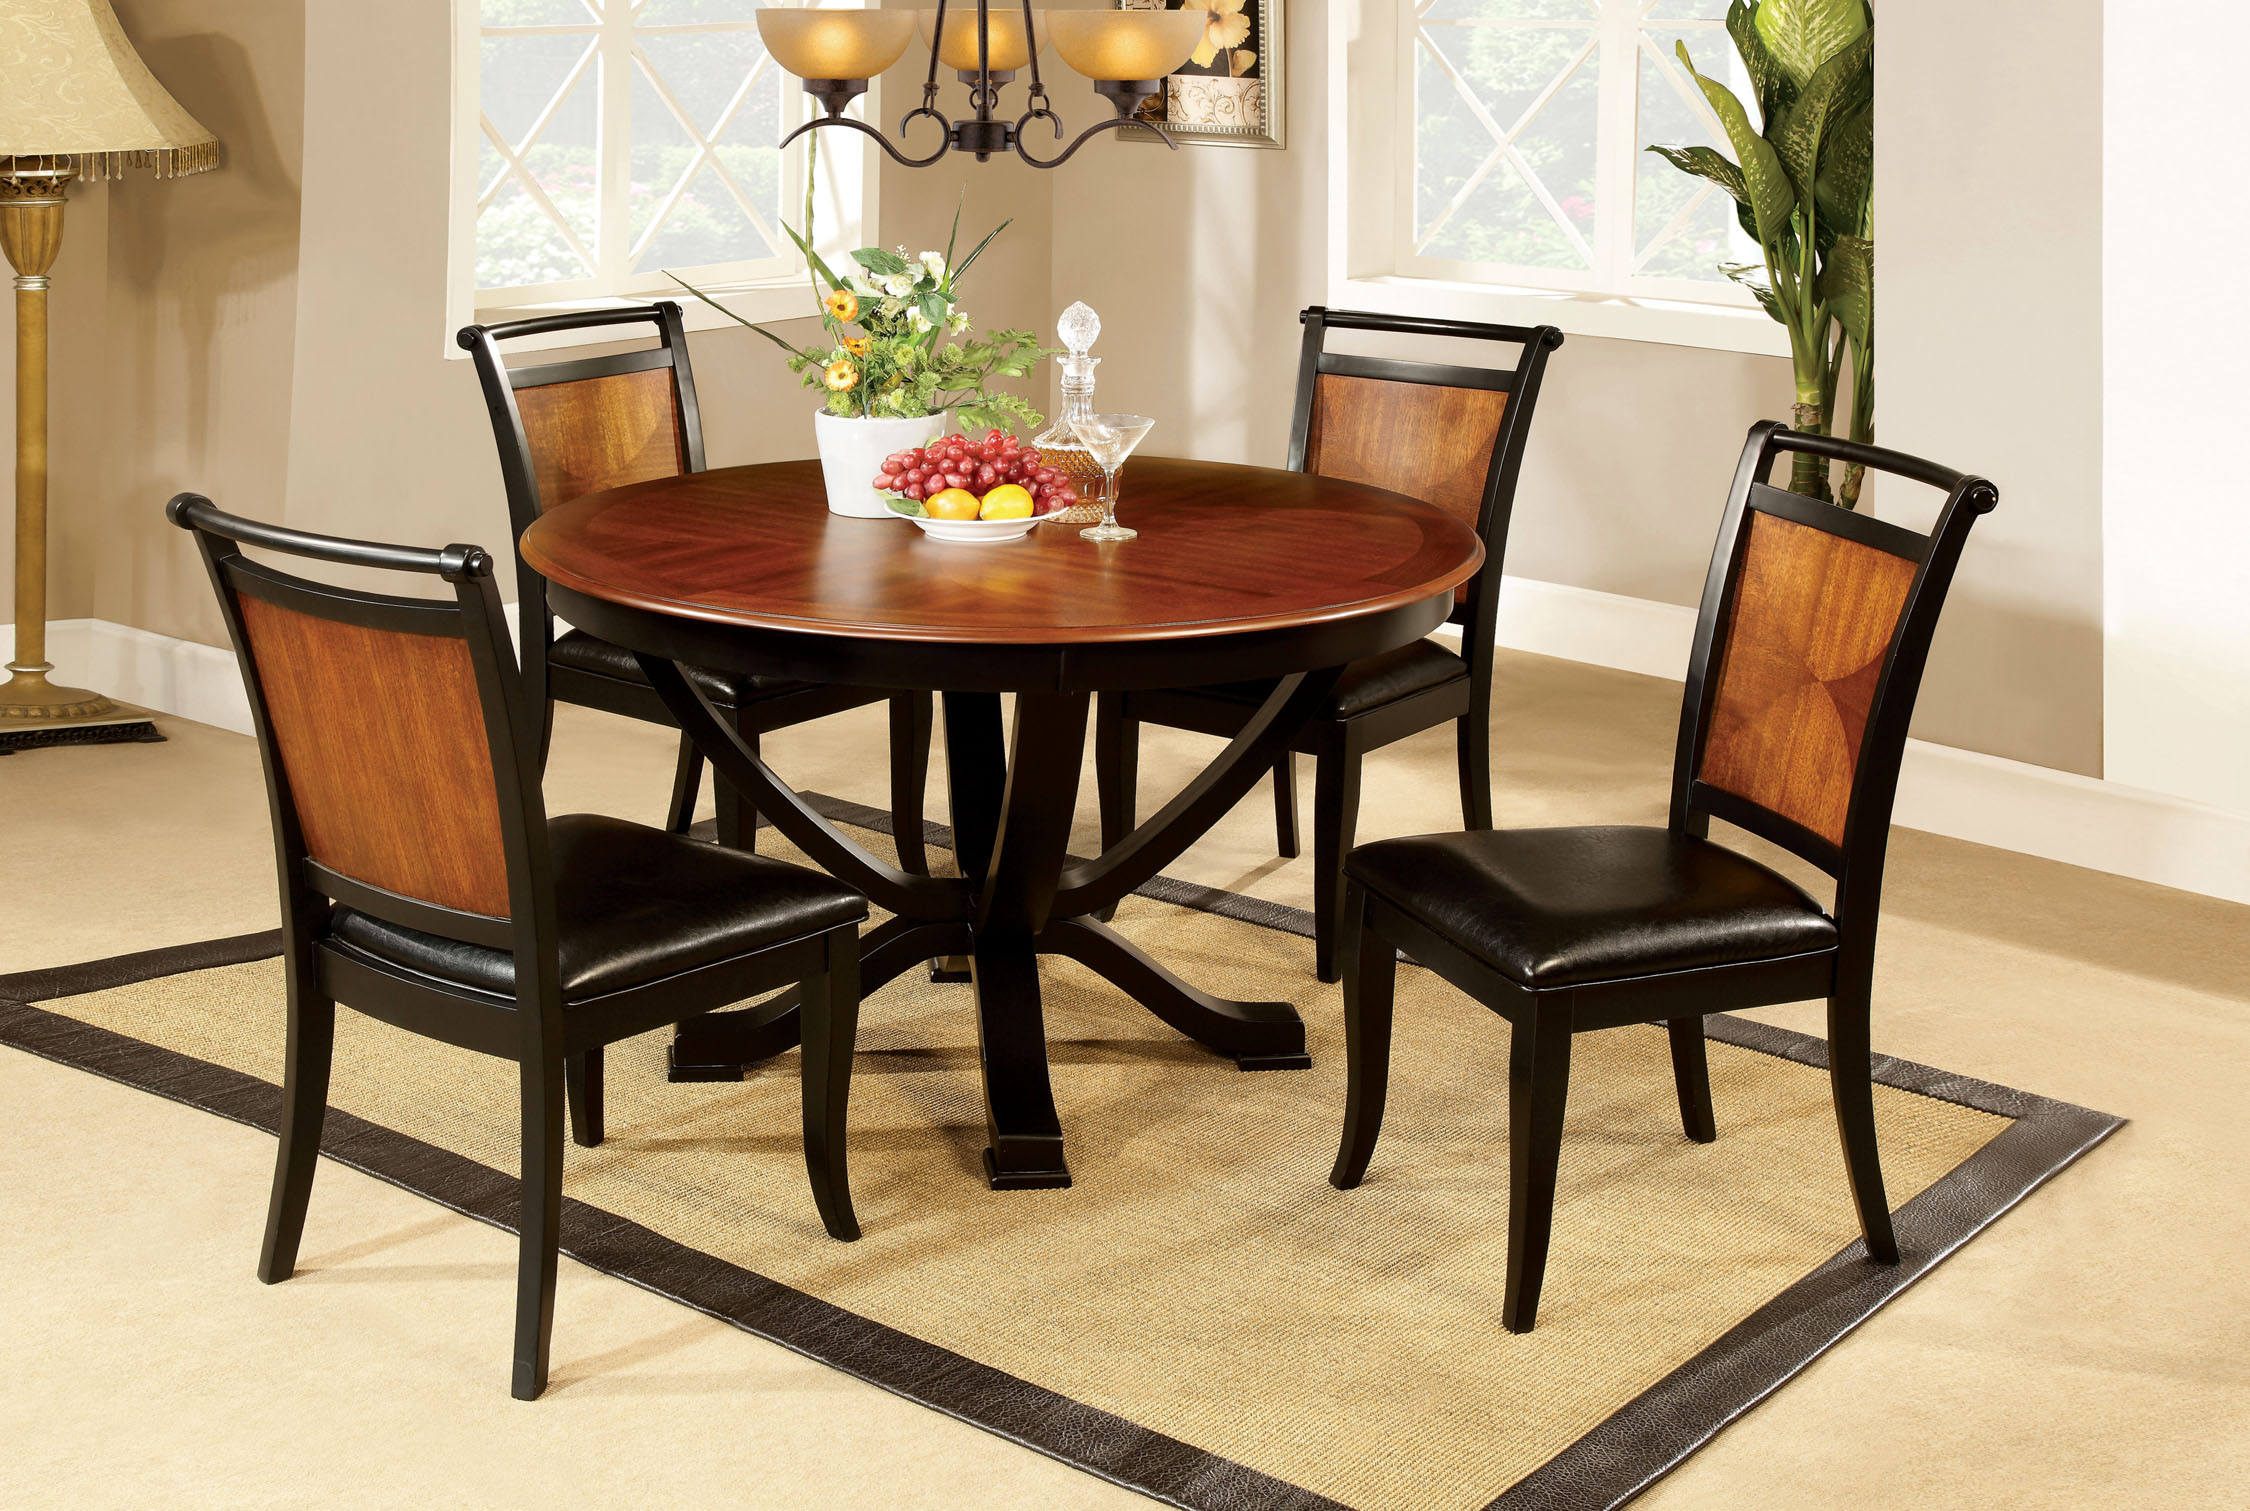 Furniture of America Loritha 5Piece TwoTone Round Dining